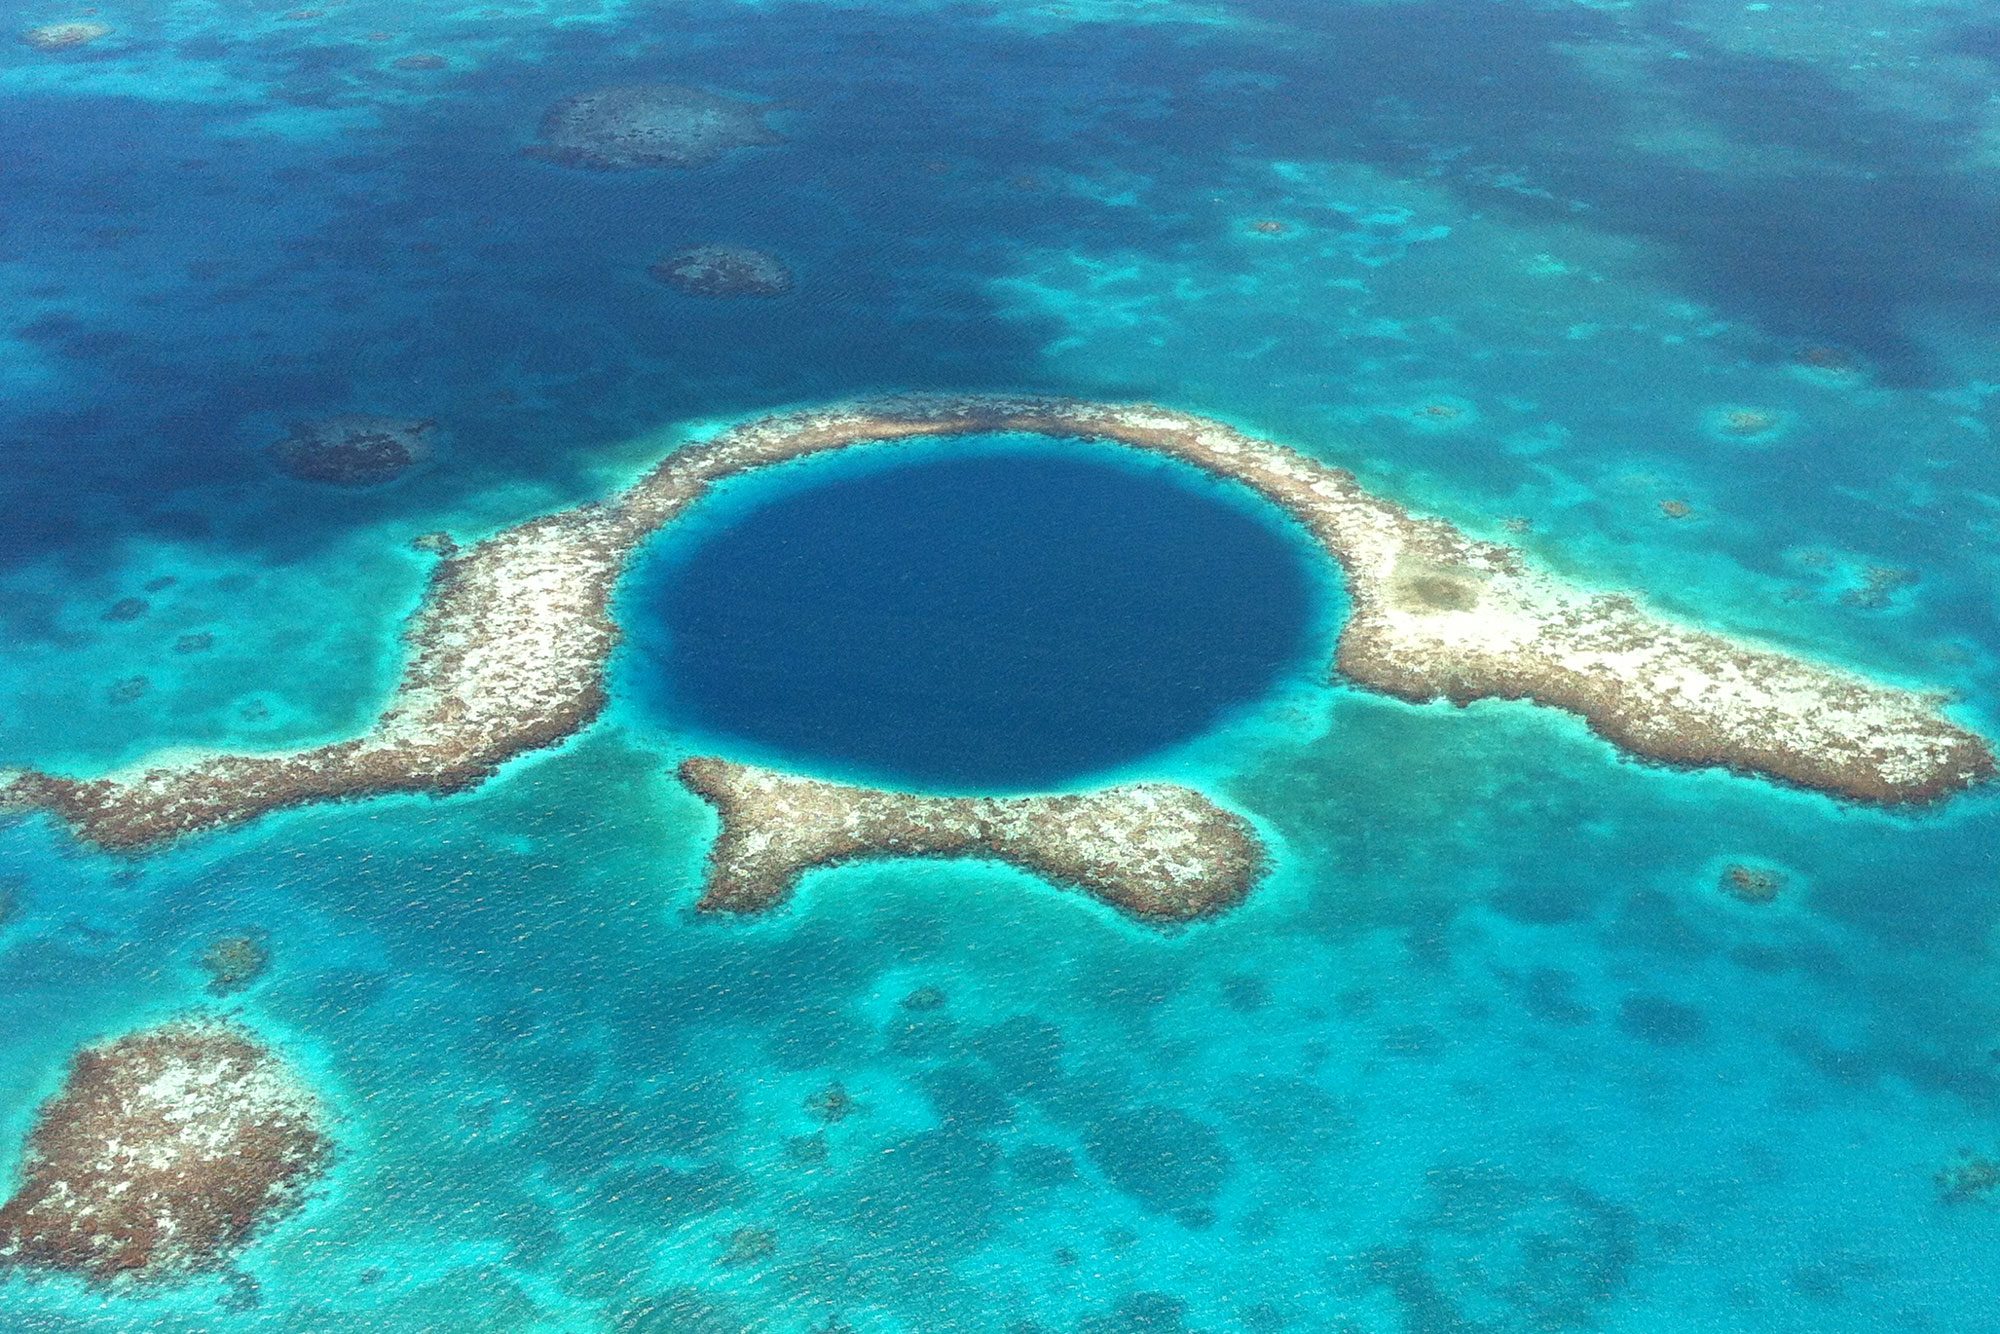 <p class=""><strong>Why you should go:</strong> The second-largest barrier reef in the world</p> <p>Have you heard of the Great Barrier Reef? We thought so. How about Belize's Barrier Reef? Not so much, right? We're here to tell you that in 2024, it's time to put this <a href="https://www.rd.com/article/7-natural-wonders-of-the-world/">natural wonder</a> on your must-visit list. The world's second-largest barrier reef (behind Australia's), it is actually the biggest reef in both the northern and western hemispheres. The snorkeling here is magnificent, and so is the diving—plus, it's not as crowded as the better-known Australian alternative. Even better, Belize is easy to reach, one of the safest countries in the world and an affordable place to visit. It's also one of the foreign countries that uses U.S. dollars.</p> <p>If you're looking for the perfect home base while visiting, consider Belize's largest island, Ambergris Caye. The Belize Barrier Reef is just a quarter-mile offshore, and you'll definitely want to check out the protected Hol Chan Marine Reserve, which is just a 10-minute boat ride from the main town of San Pedro. When you're not snorkeling or swimming, spend your days popping into Belizean art galleries and souvenir shops or just lounging on the white sand.</p> <p><strong>Where to stay:</strong> Try the <a href="https://www.tripadvisor.com/Hotel_Review-g291962-d21309594-Reviews-Alaia_Belize_Autograph_Collection_Hotel-San_Pedro_Ambergris_Caye_Belize_Cayes.html" rel="noopener noreferrer">Alaia Belize</a>, an Autograph Collection hotel in the island's historic town of San Pedro. This beachfront hotel is just 650 yards from the Belize Barrier Reef Reserve and has stunning views of the Caribbean Sea. Plus, it has an on-site dive shop and three pools, including Belize's first-ever suspended rooftop pool and a lounge with 360-degree views.</p> <p class="listicle-page__cta-button-shop"><a class="shop-btn" href="https://www.tripadvisor.com/Hotel_Review-g291962-d21309594-Reviews-Alaia_Belize_Autograph_Collection_Hotel-San_Pedro_Ambergris_Caye_Belize_Cayes.html">Book Now</a></p>